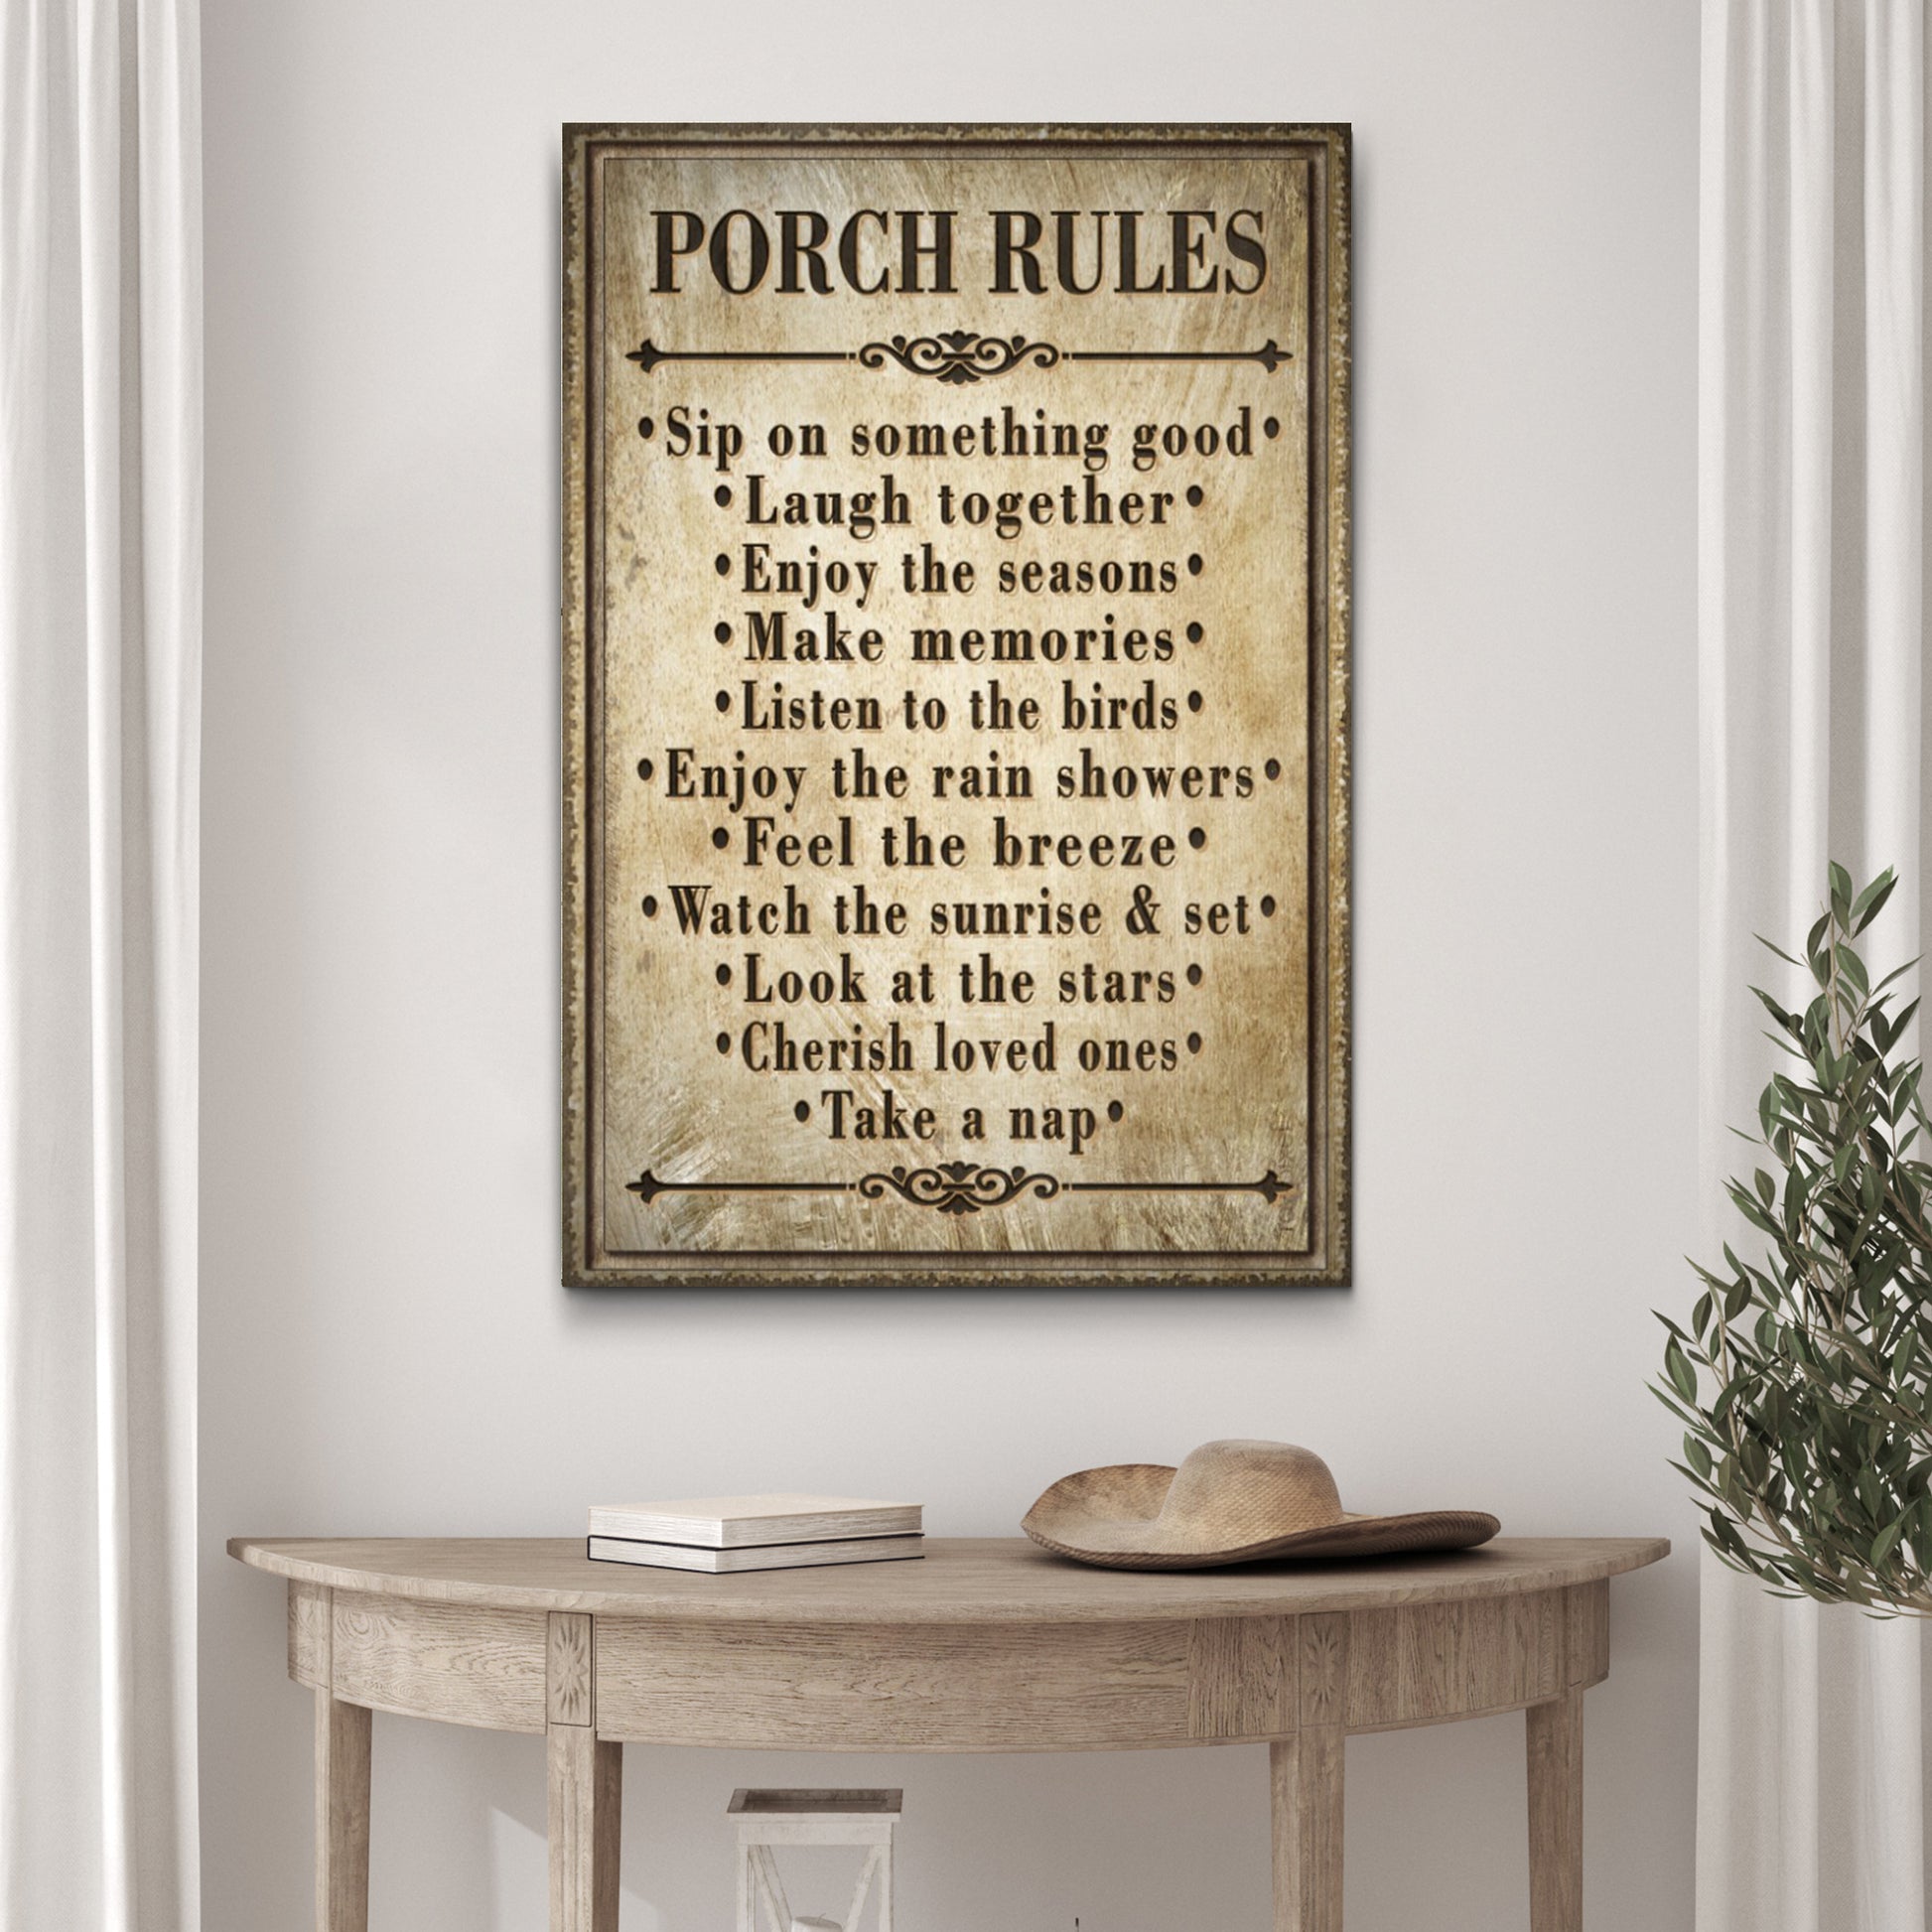 Porch Rules Sign II - Image by Tailored Canvases